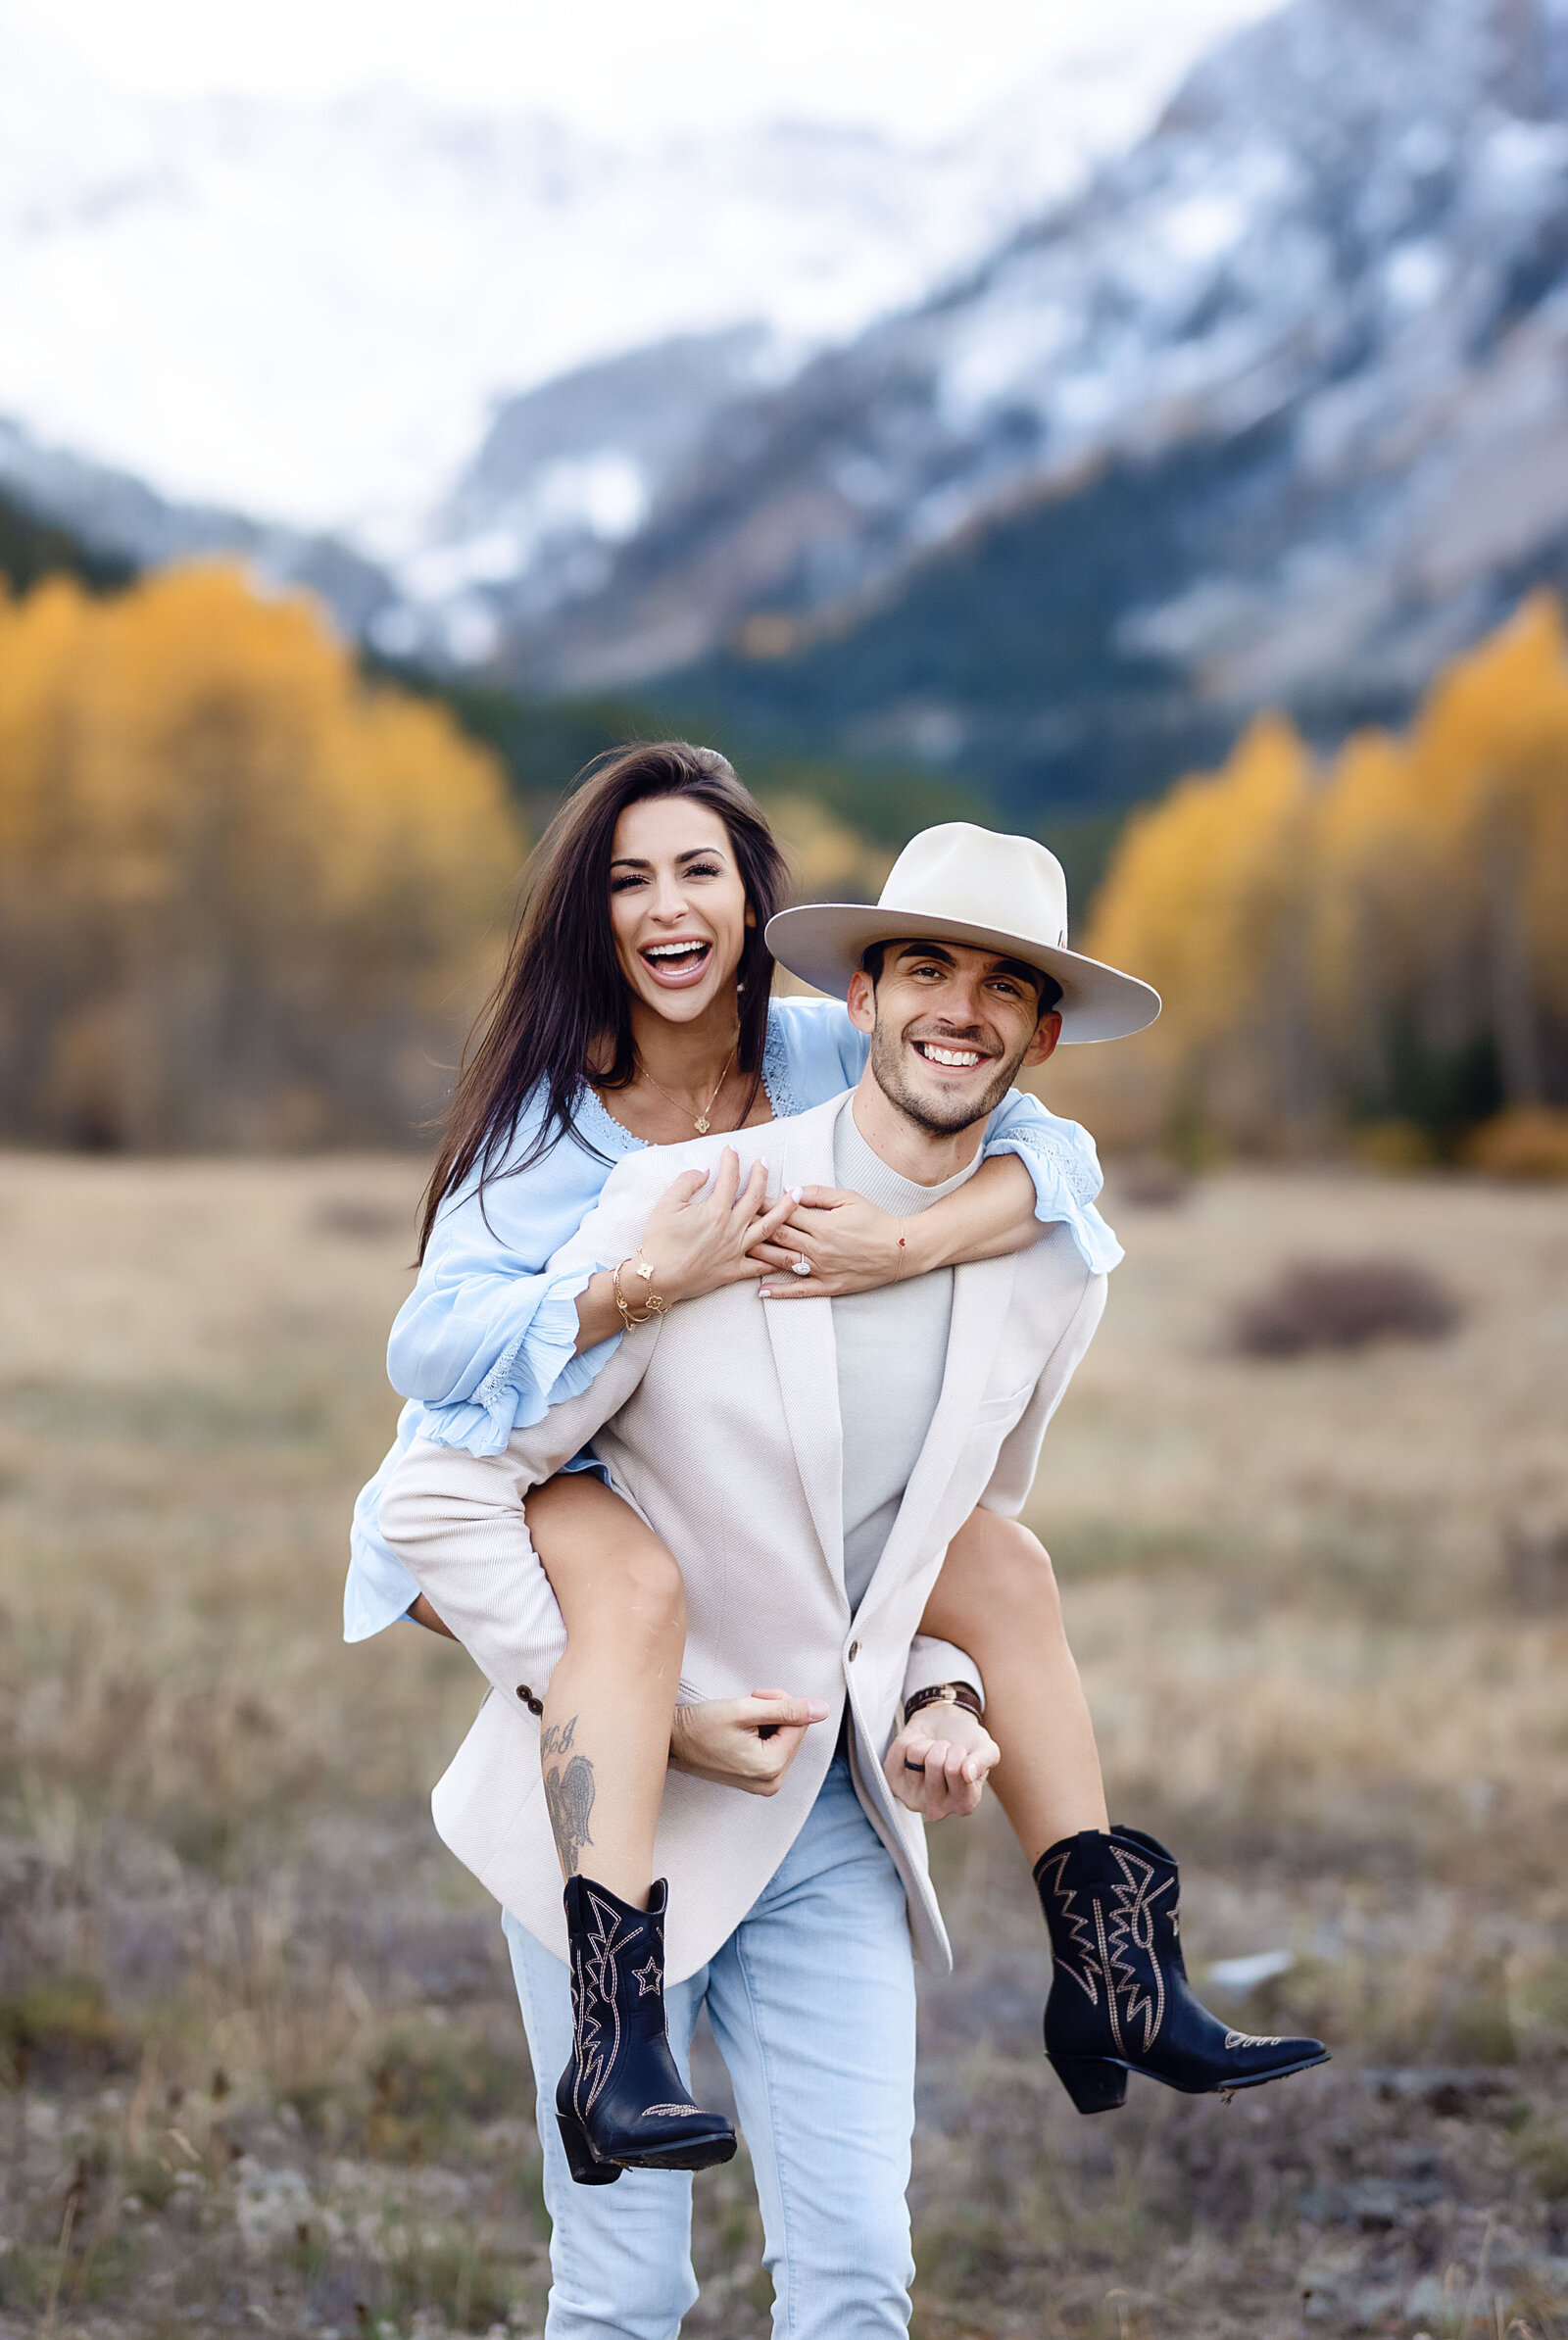 A young man has his girlfriend on his back as they dance playfully in  front of the Aspen mountains.